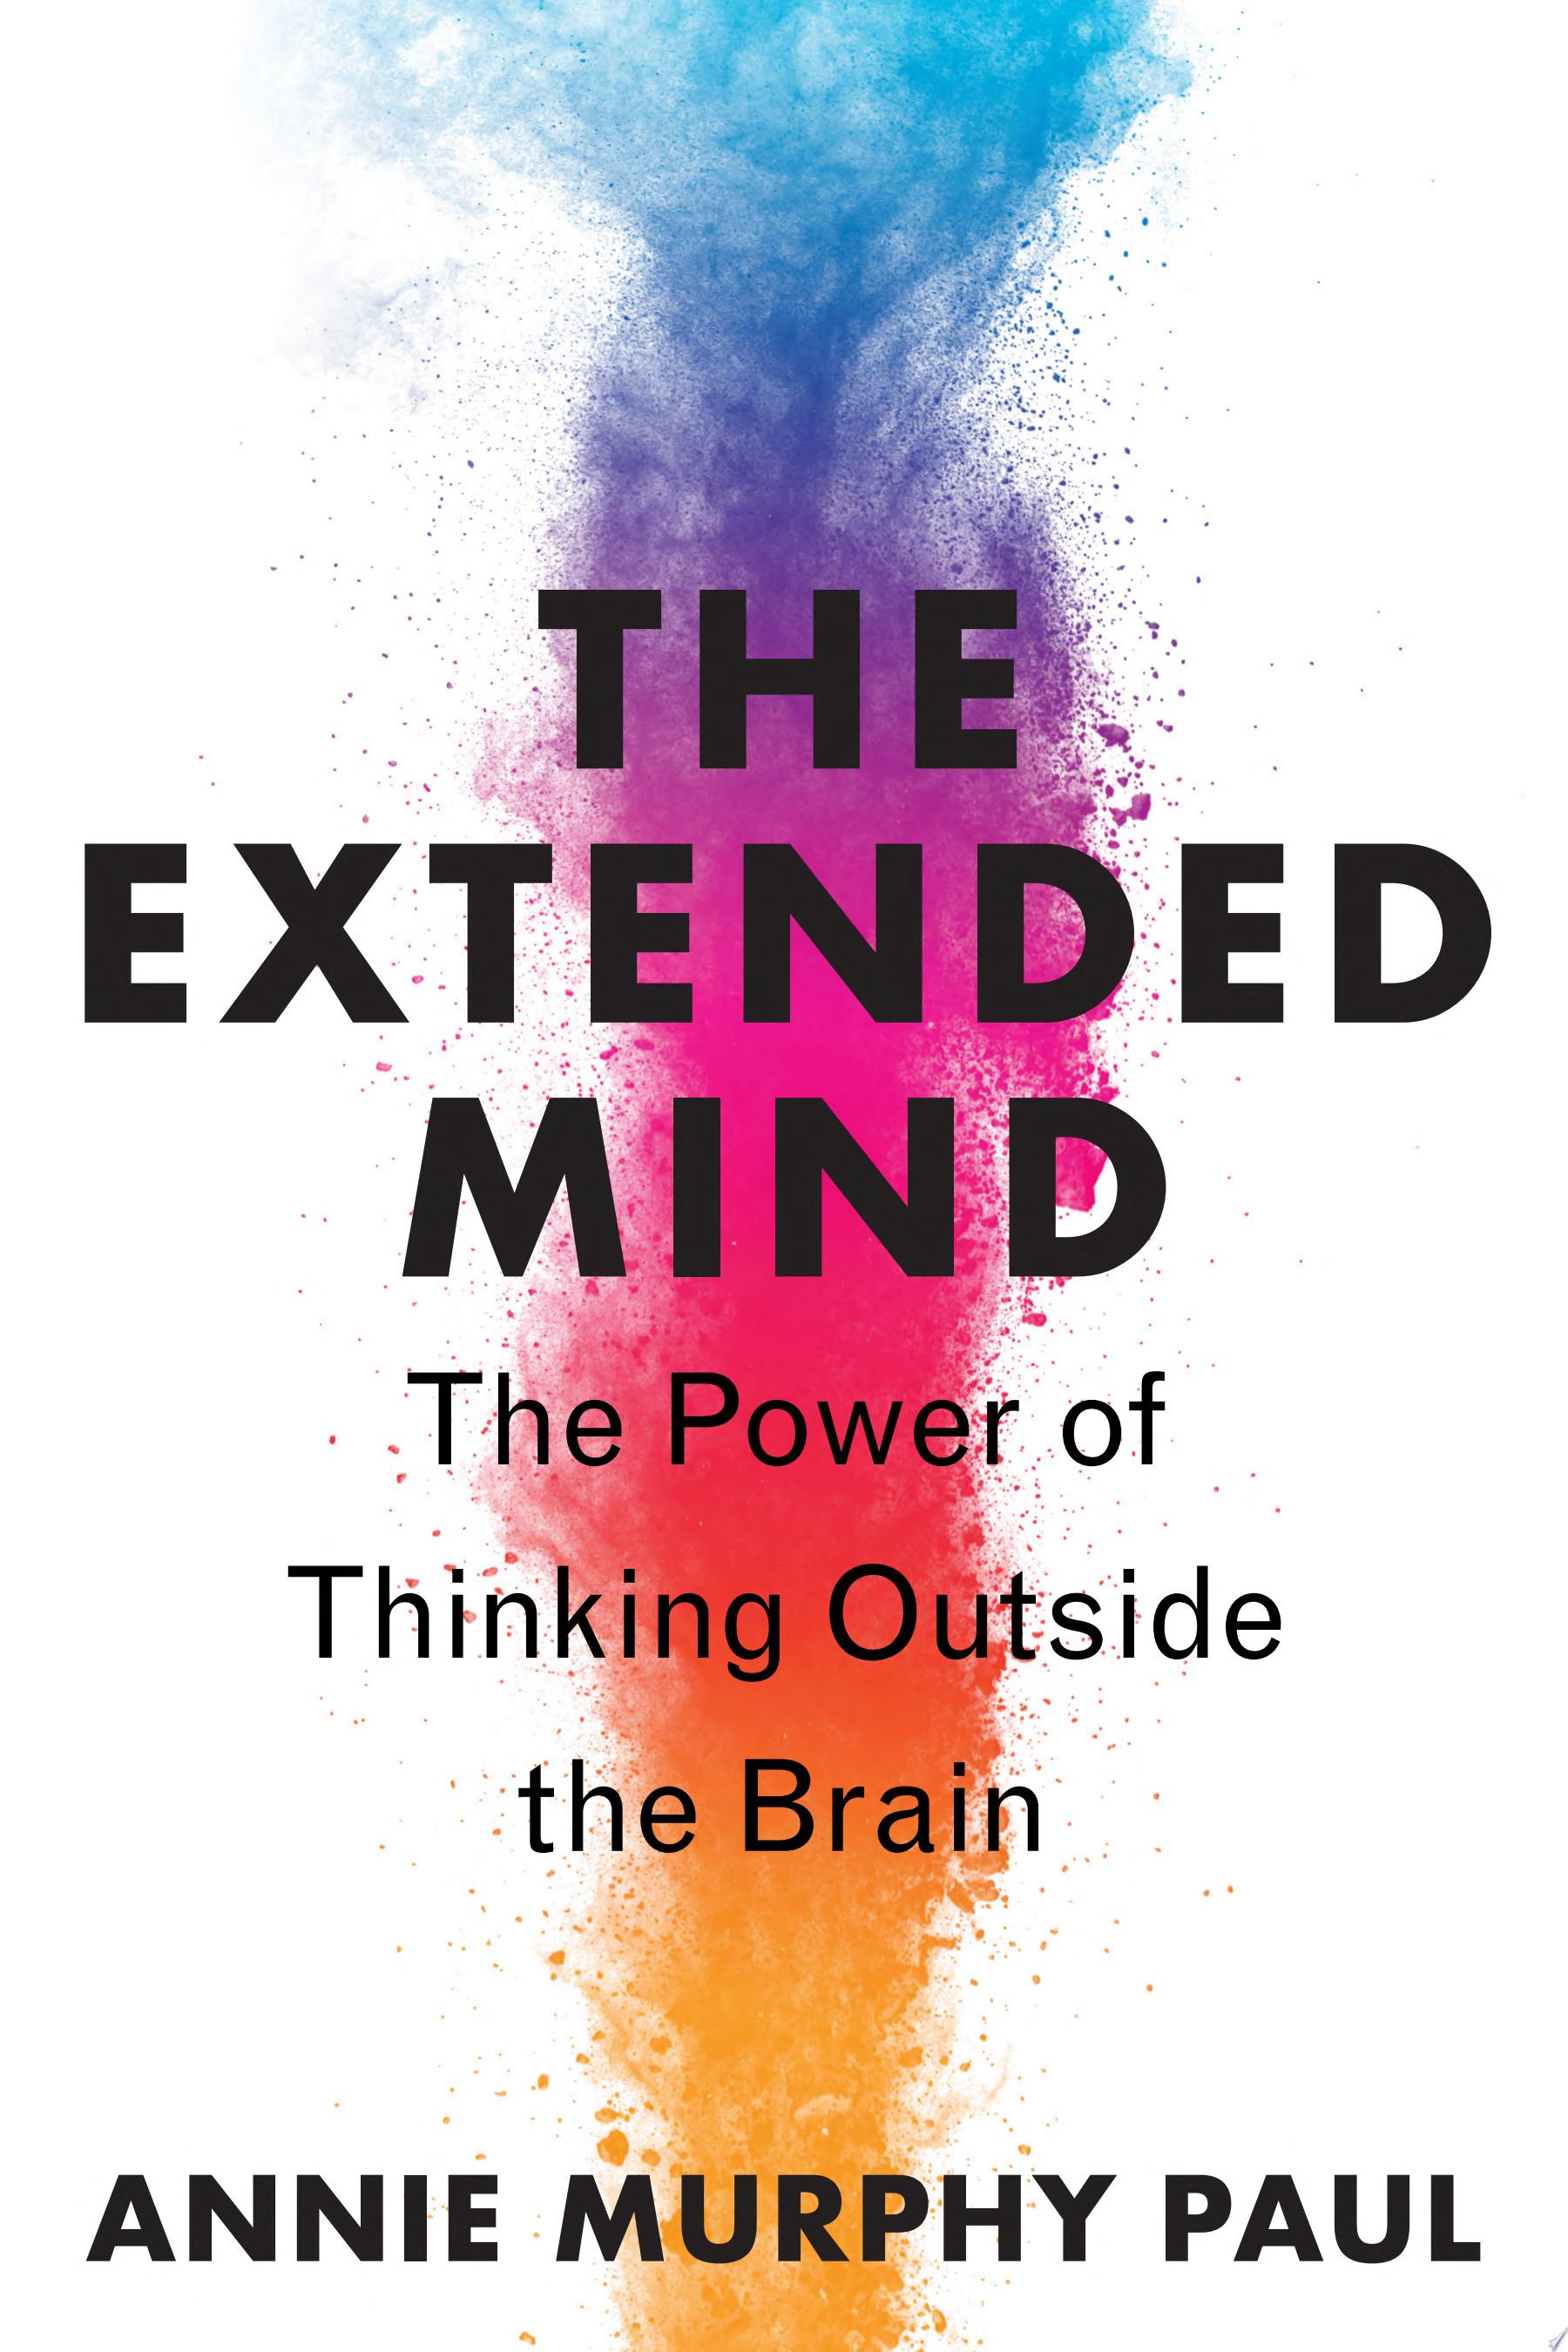 Image for "The Extended Mind"